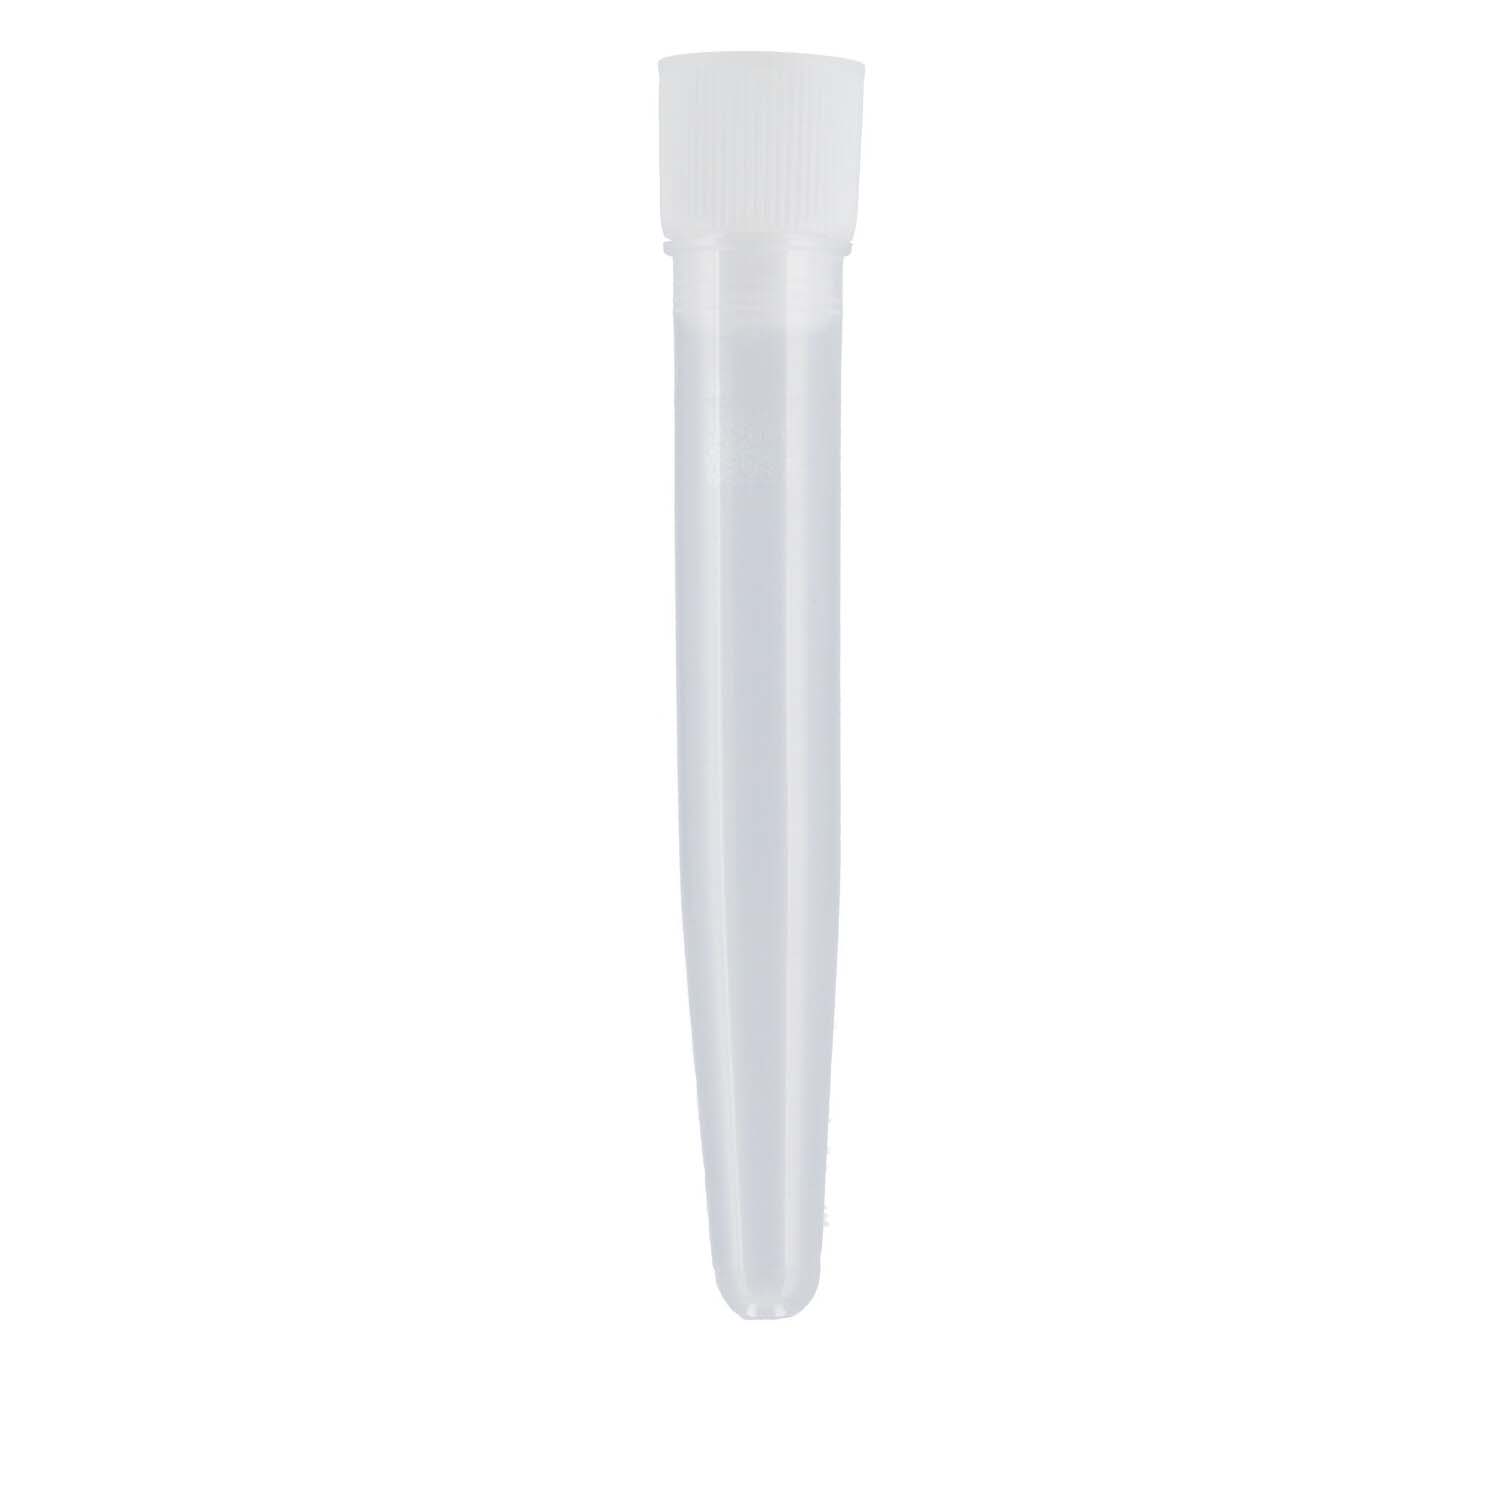 CDR BeerLab - Conical Tube Kit 10ml 100 pcs